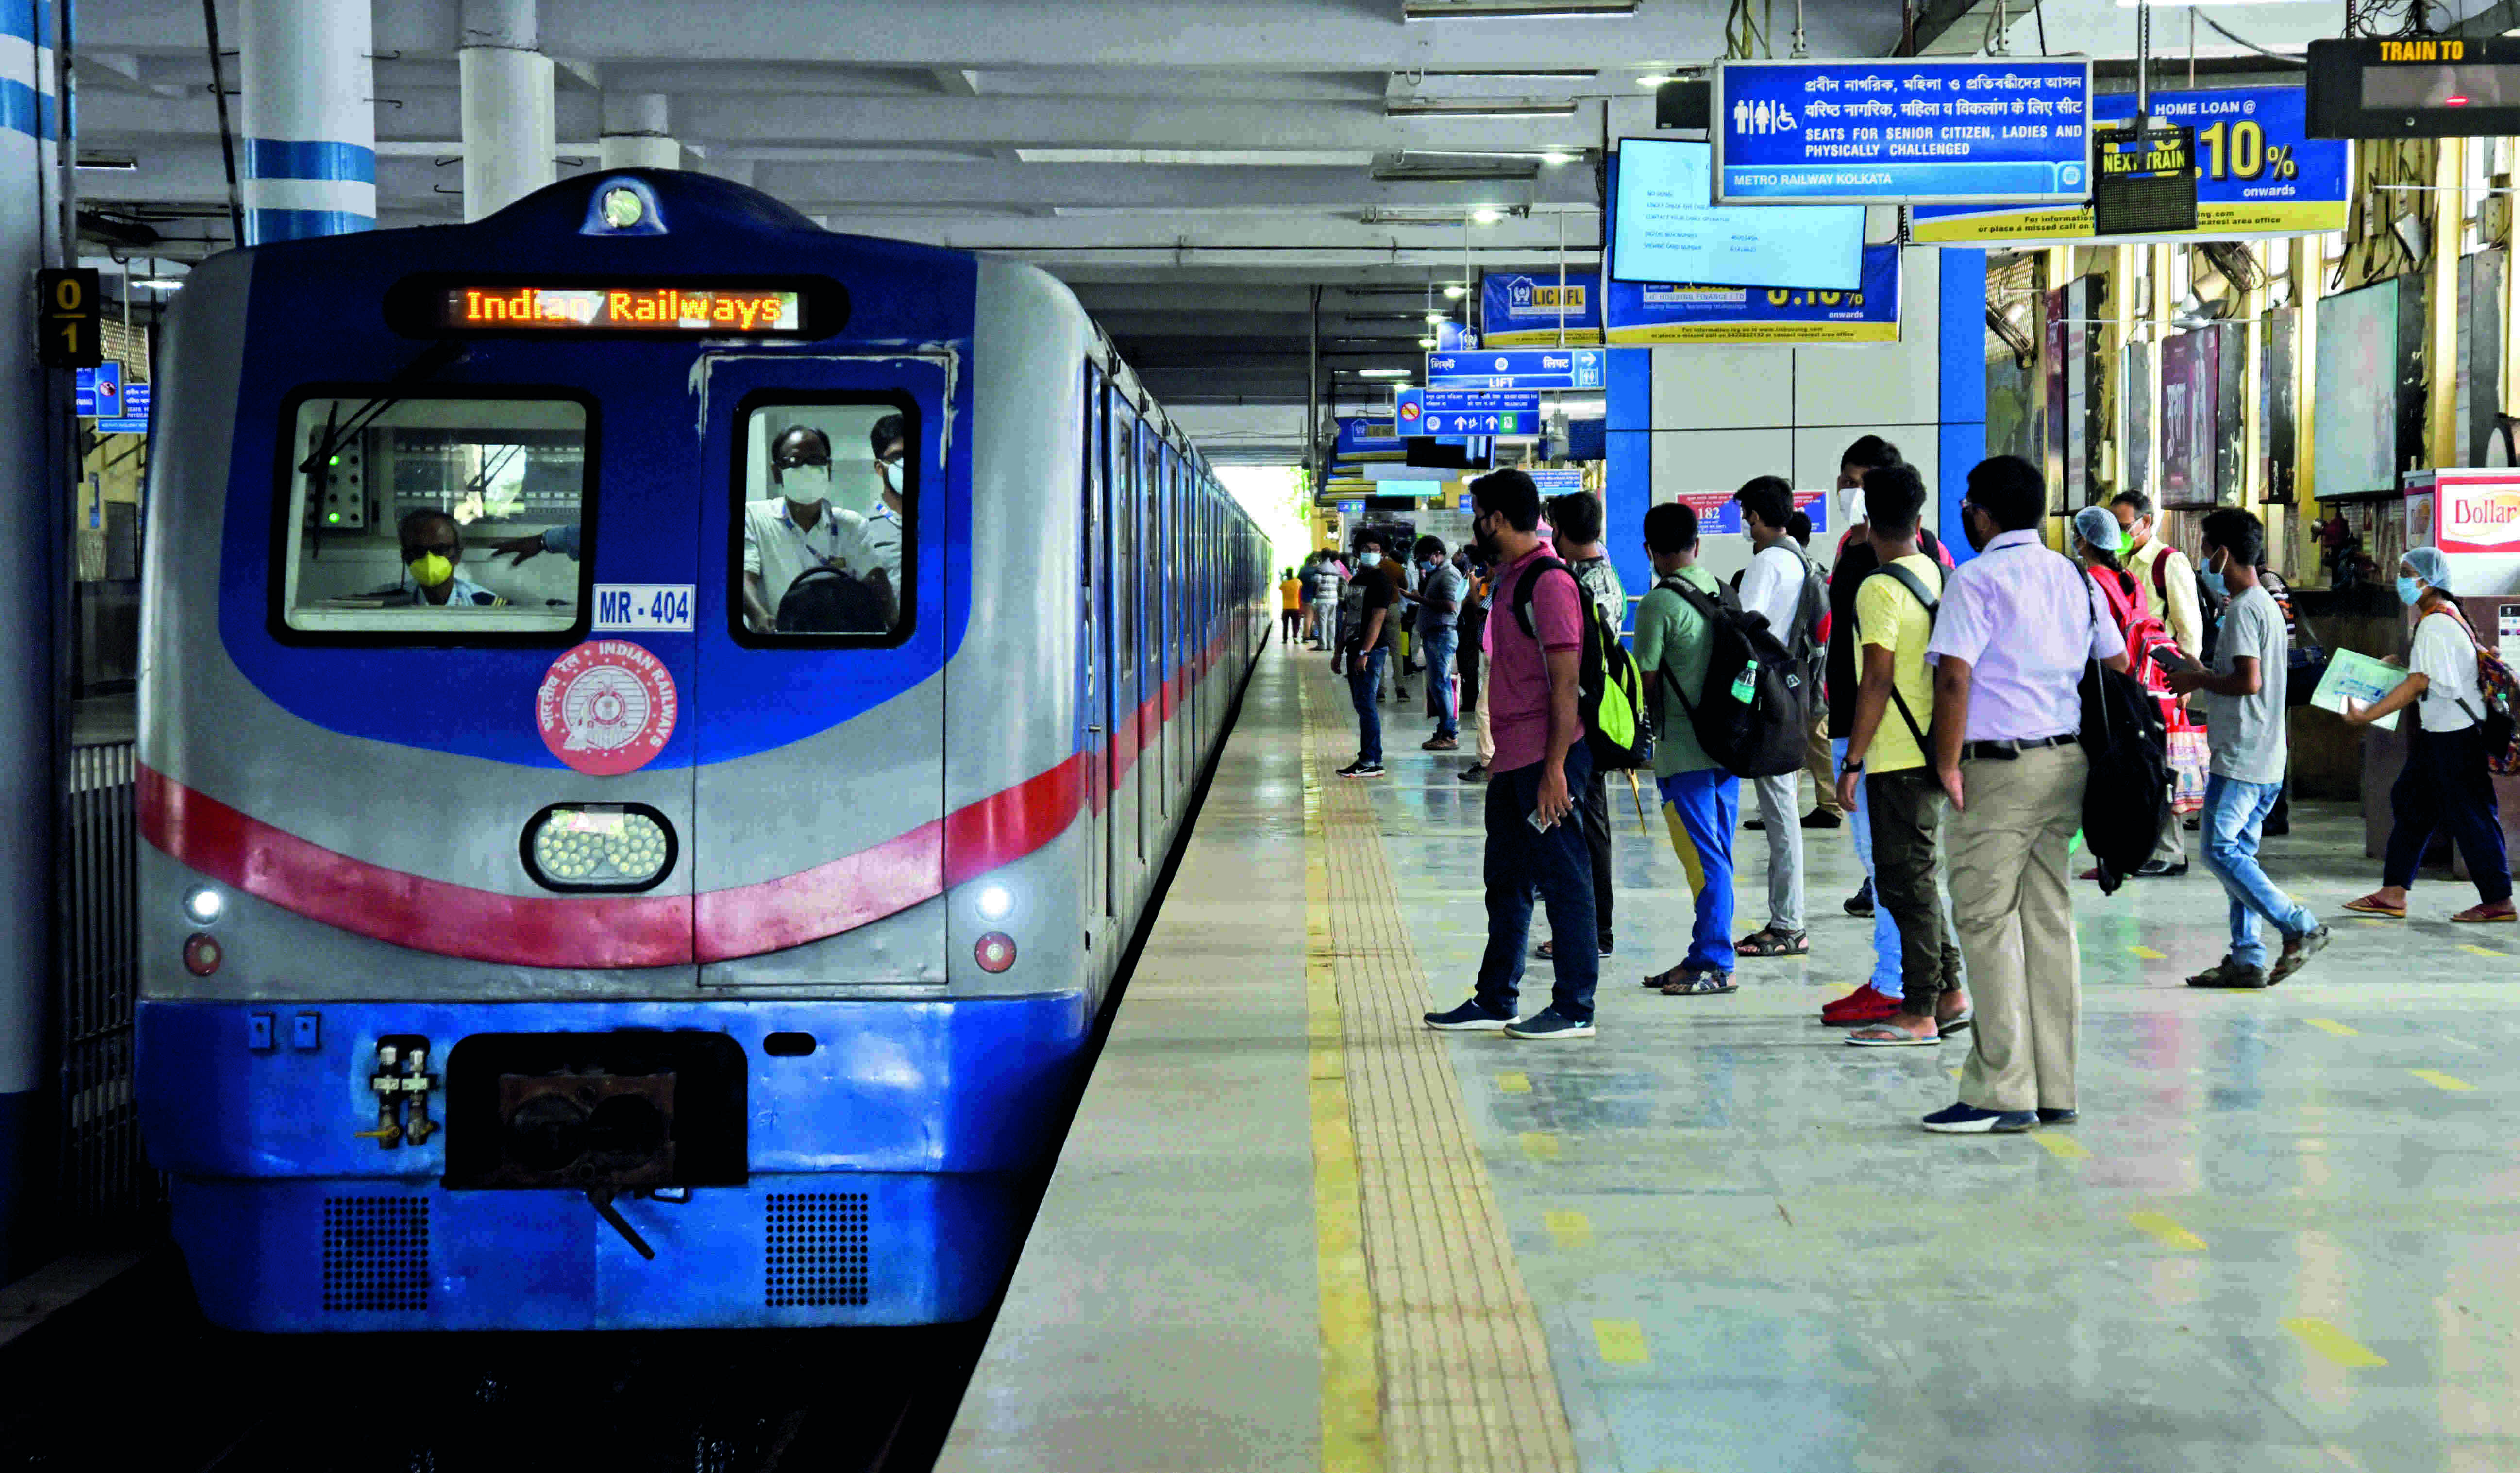 Sealdah-Sector V Metro services may be inaugurated by Rly minister on May 31